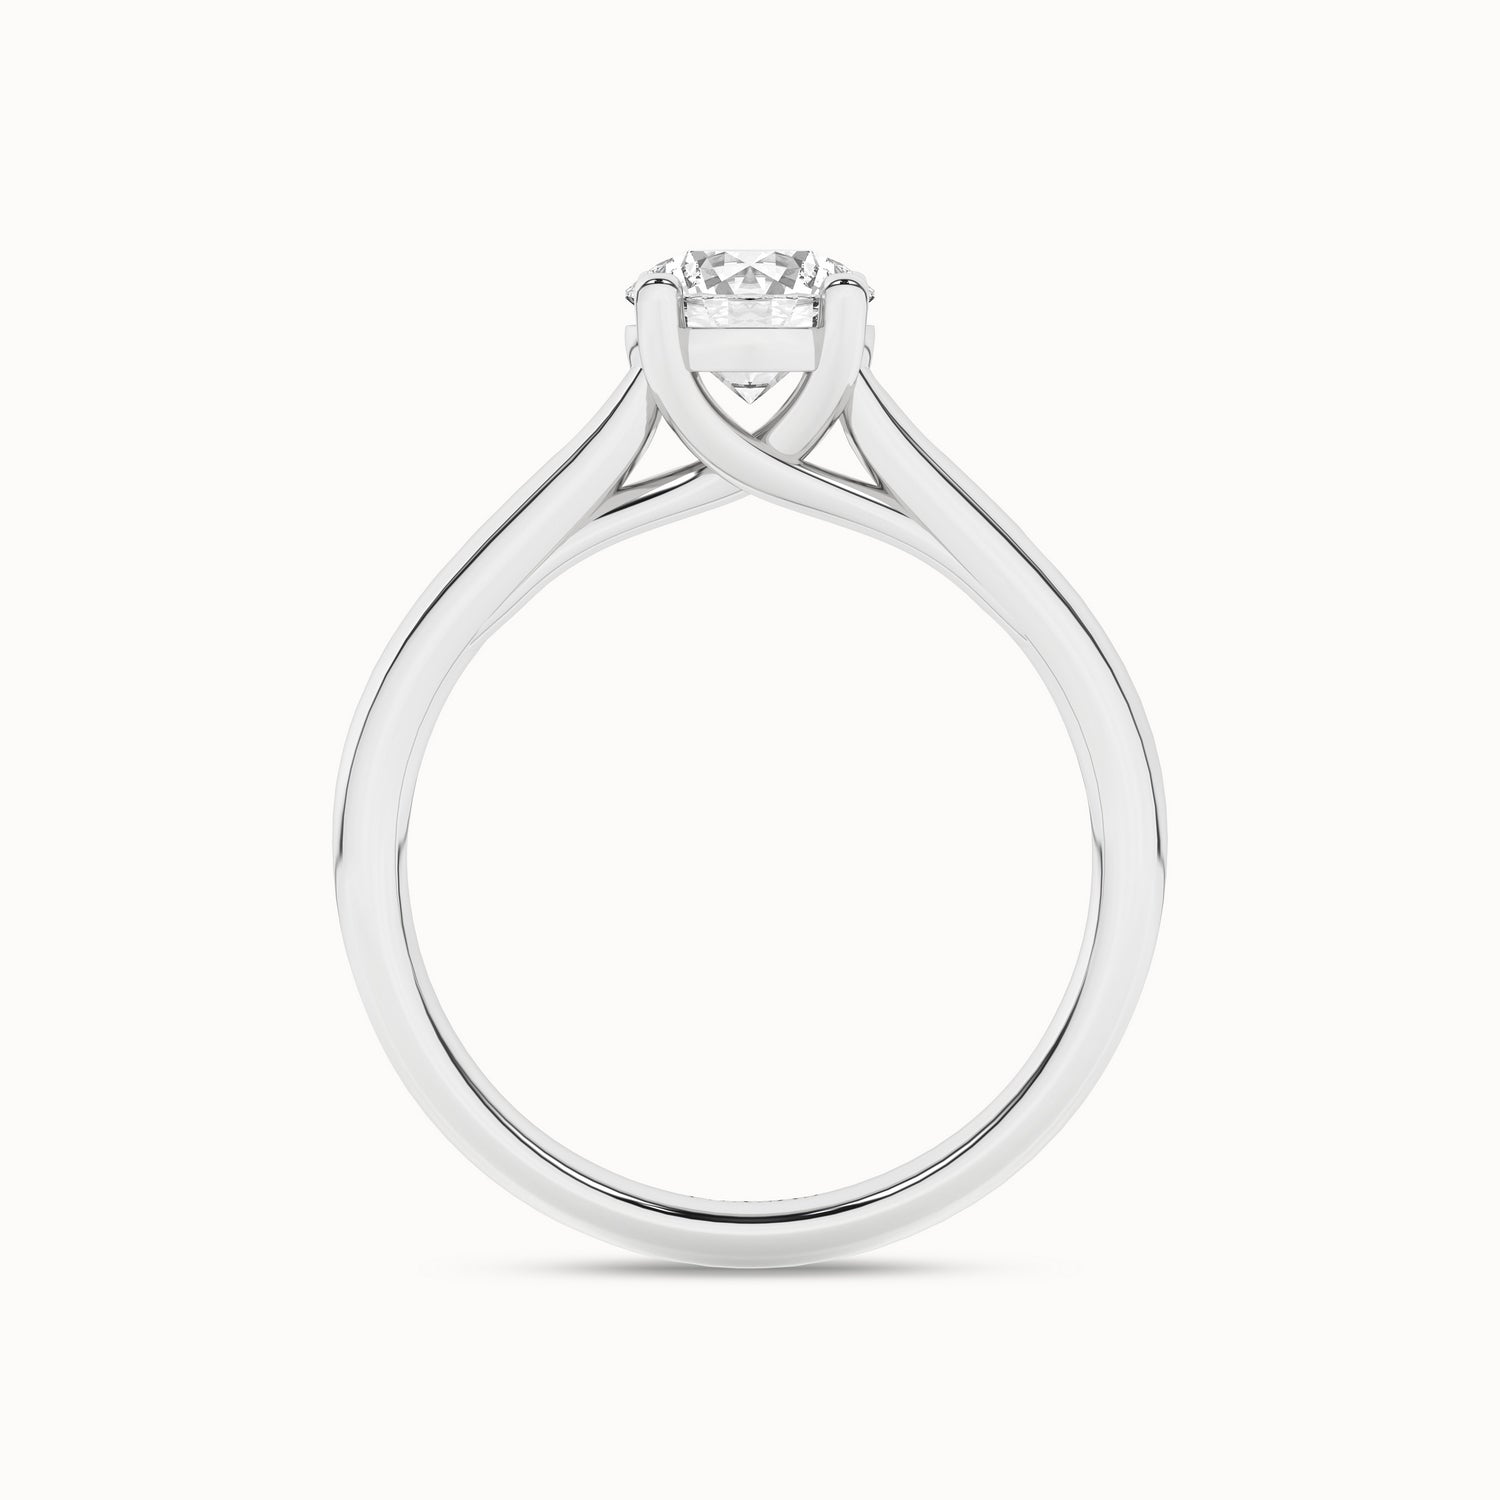 Timeless Round Ring_Product Angle_1Ct - 2